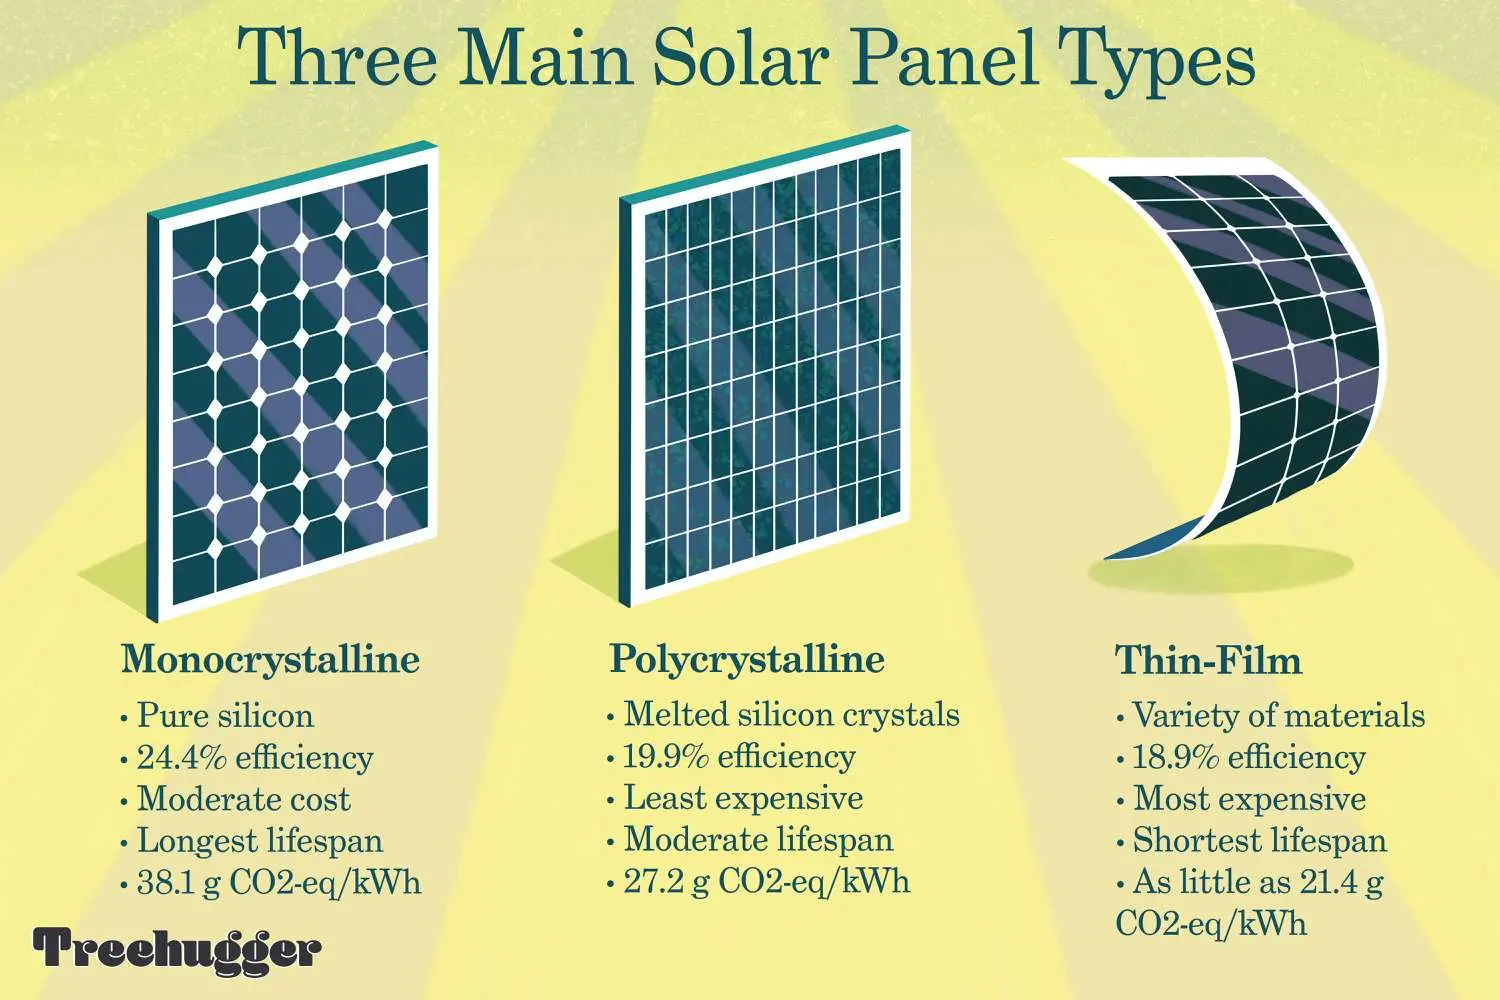 clasifications for solibri for solar panels - How do you classify in Solibri